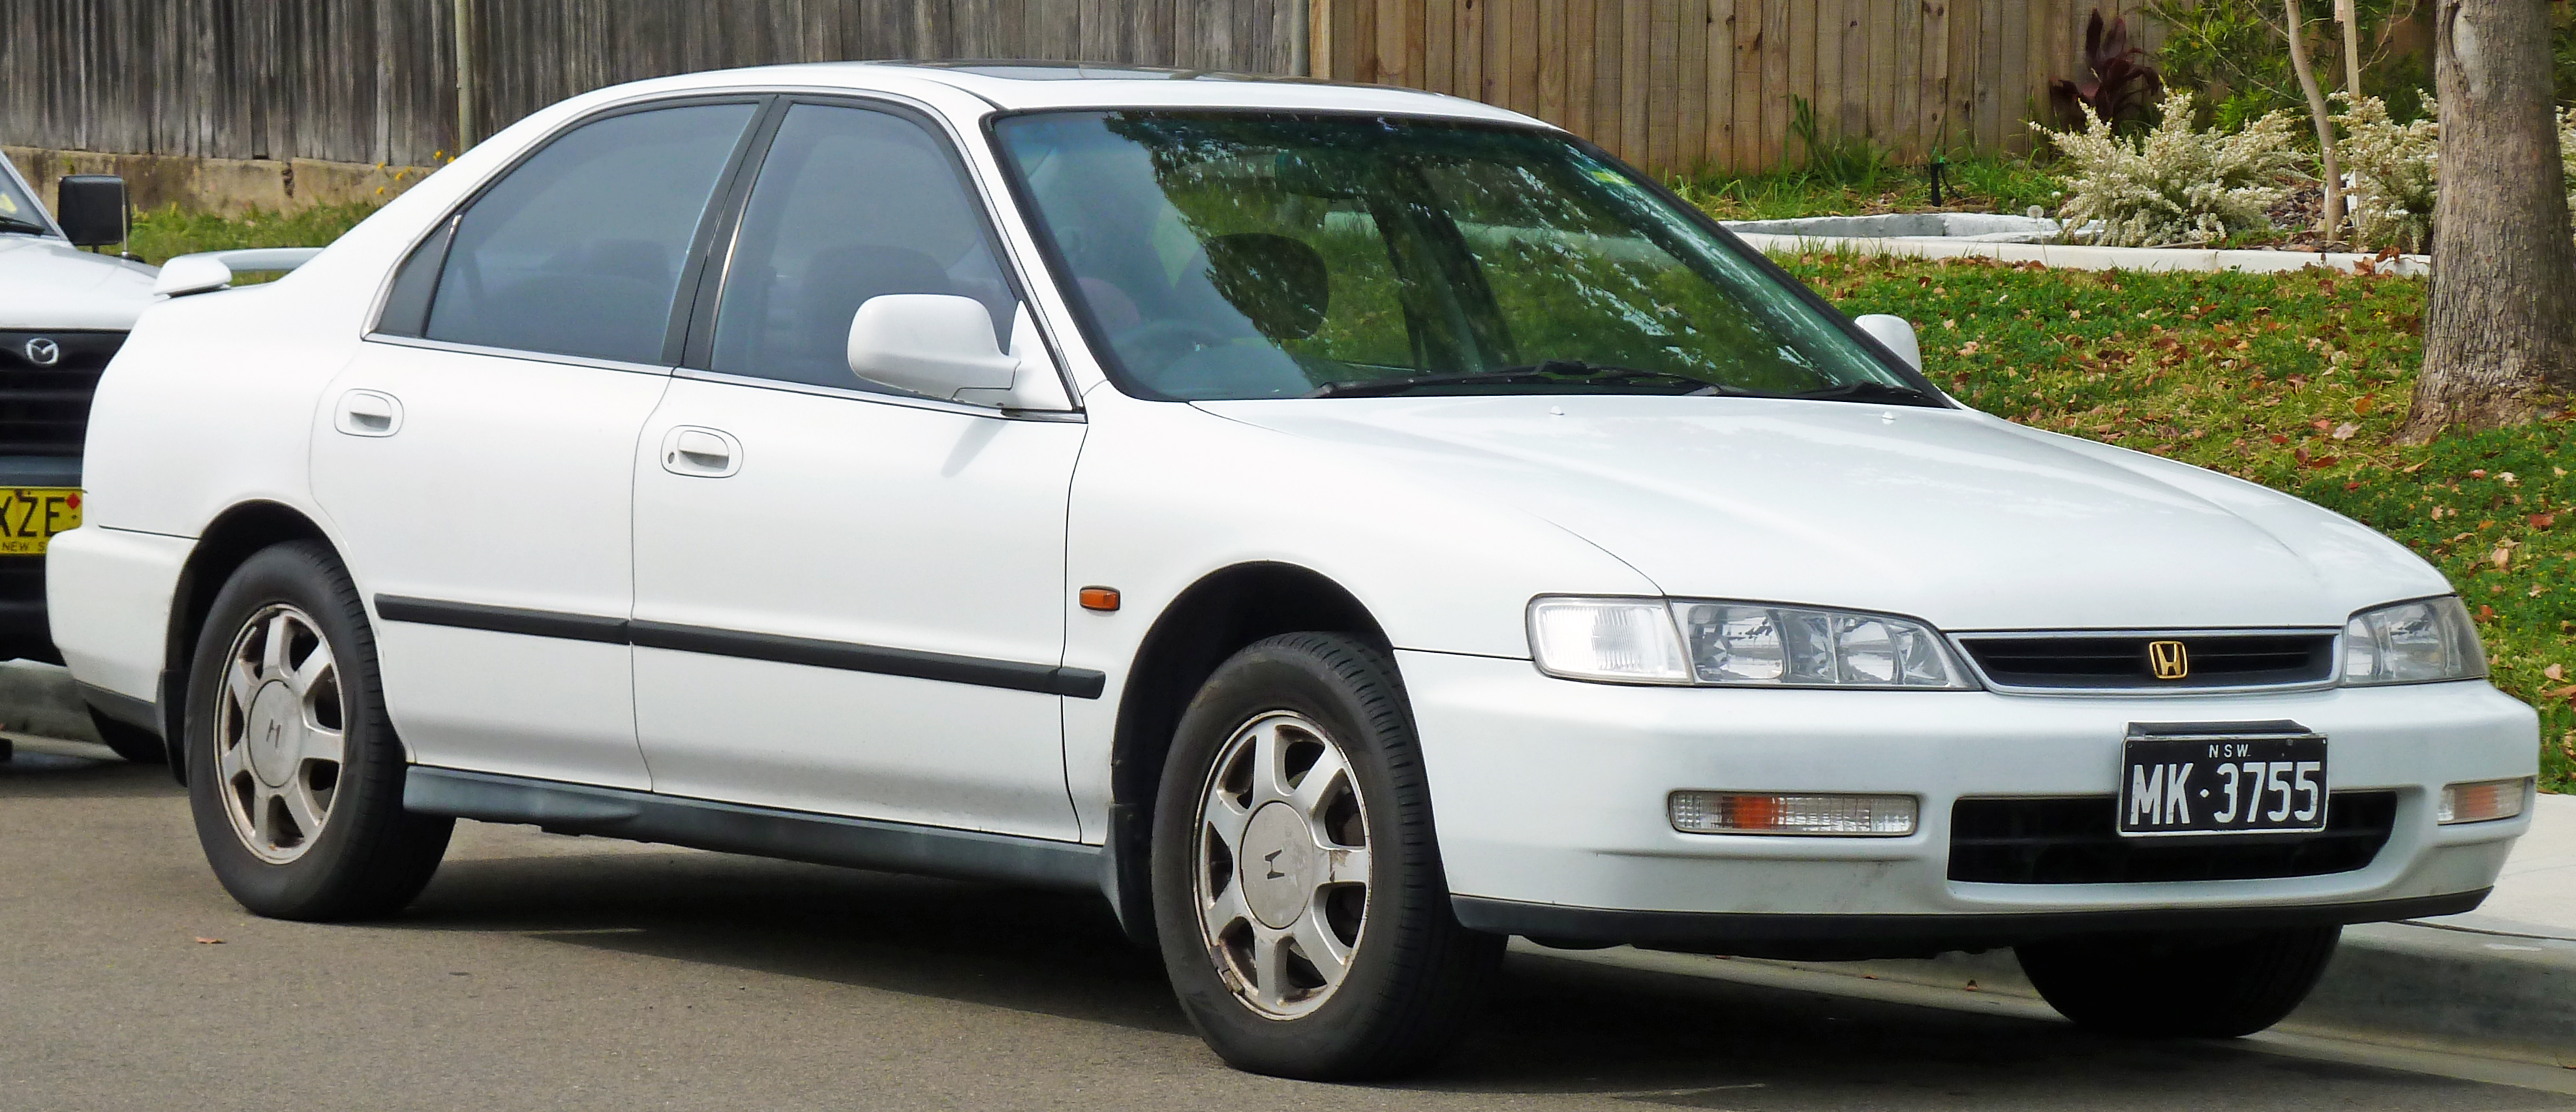 1997 Honda Accord Most Stolen Vehicle In US Last Year ...